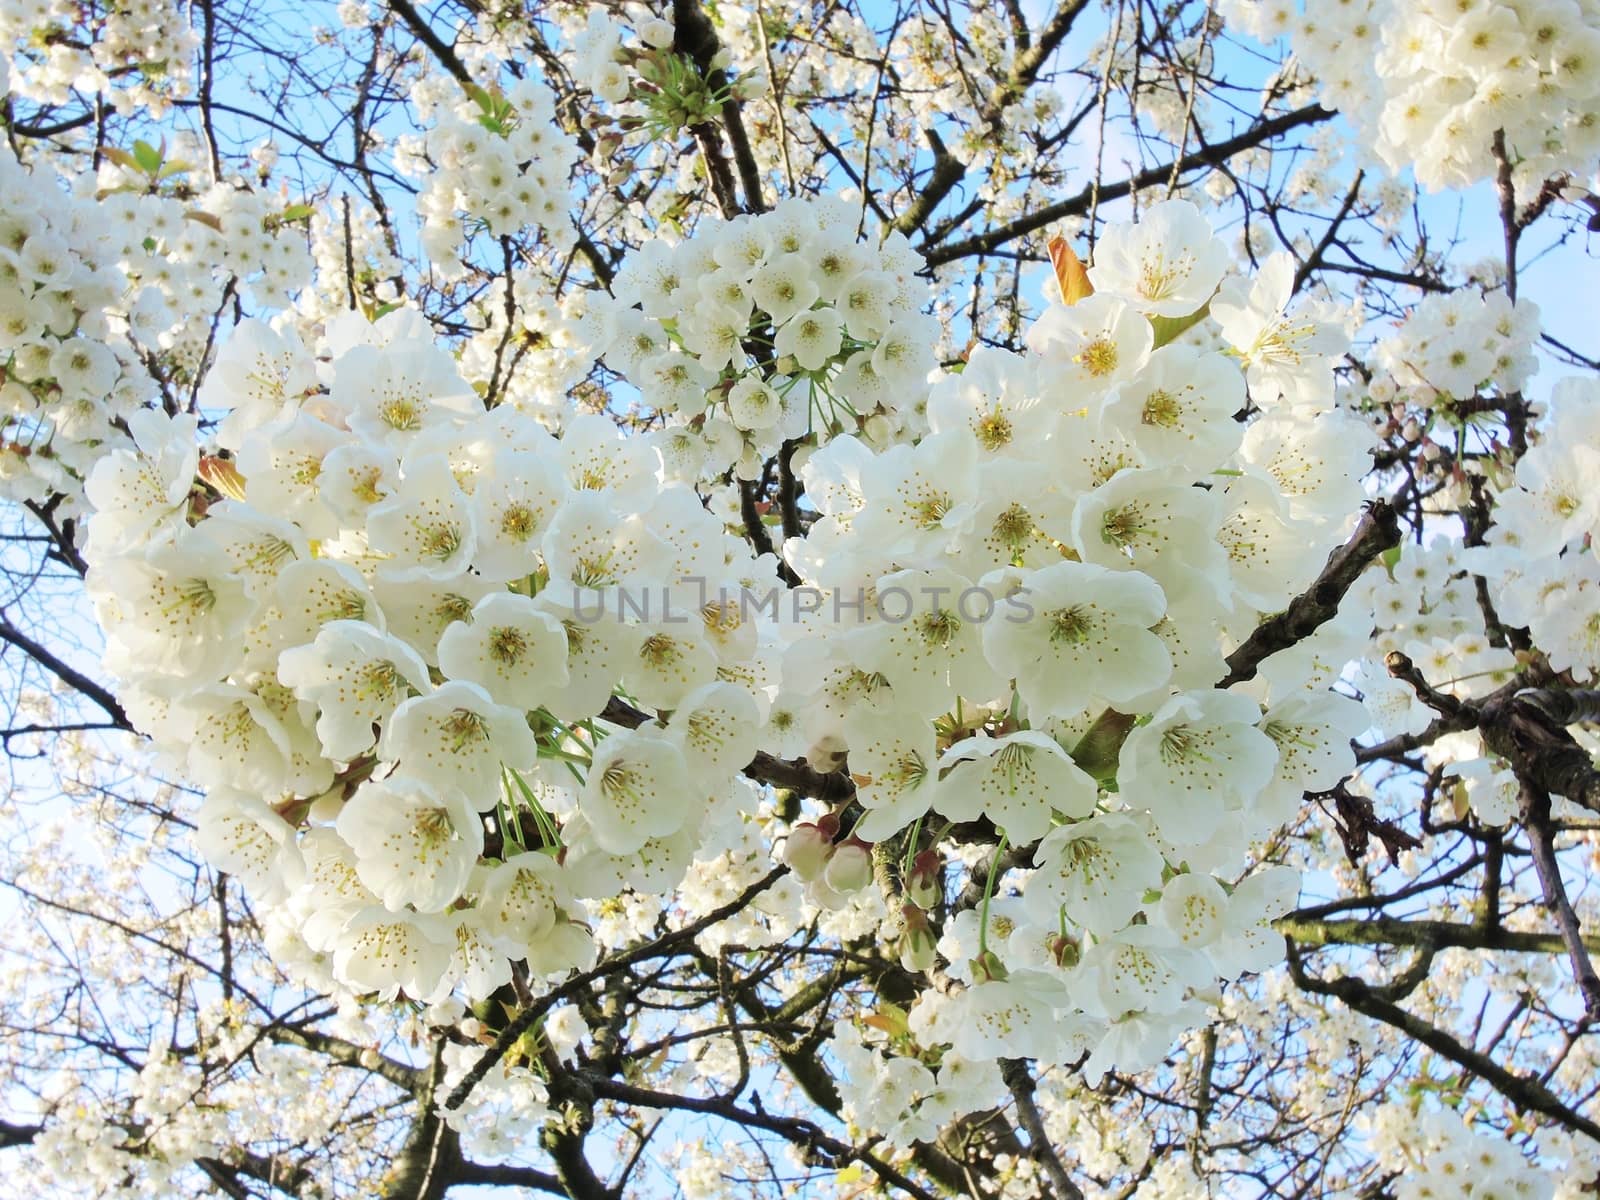 A close-up image of colourful white blossom.